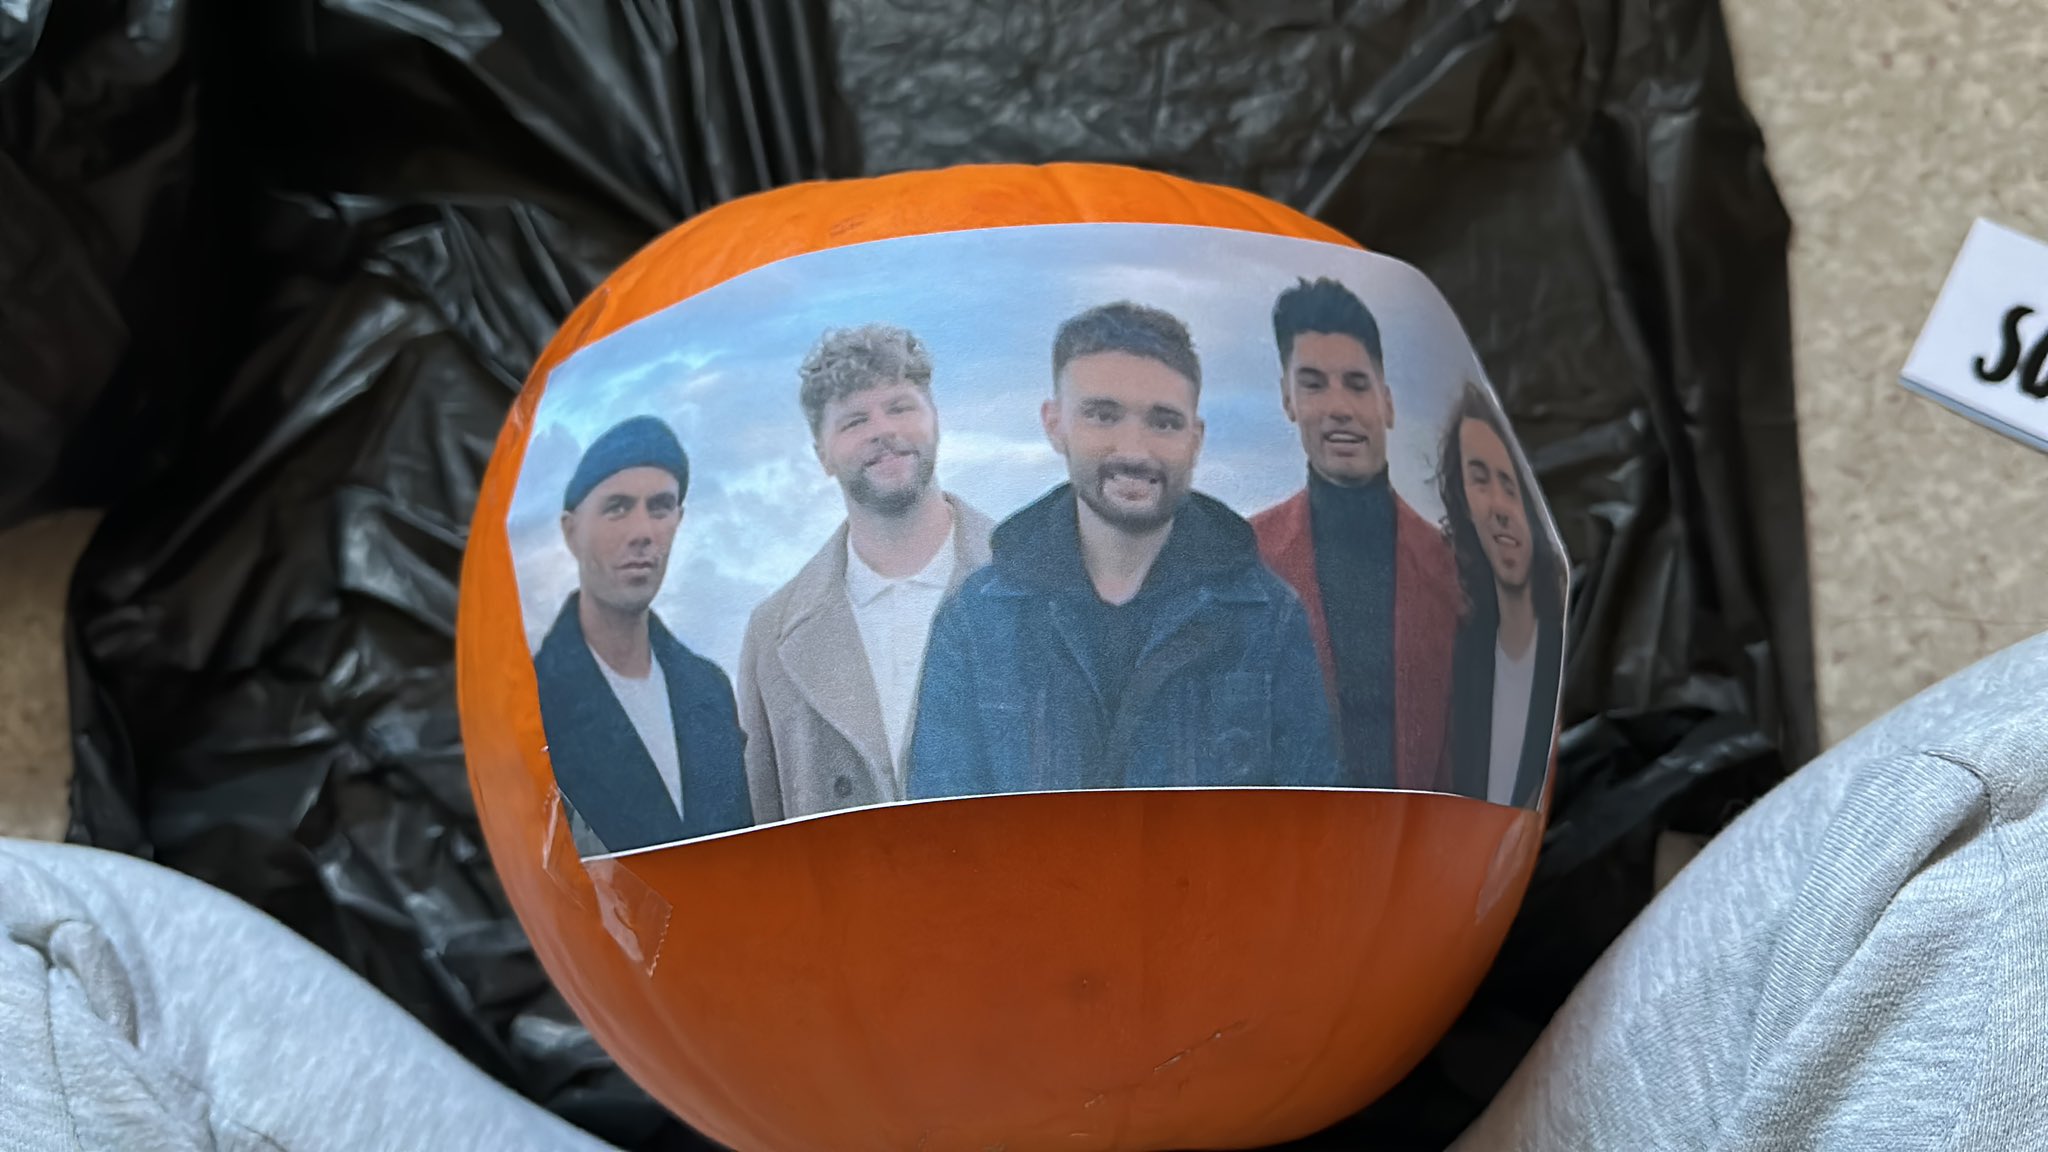 Pumpkin with image on it 